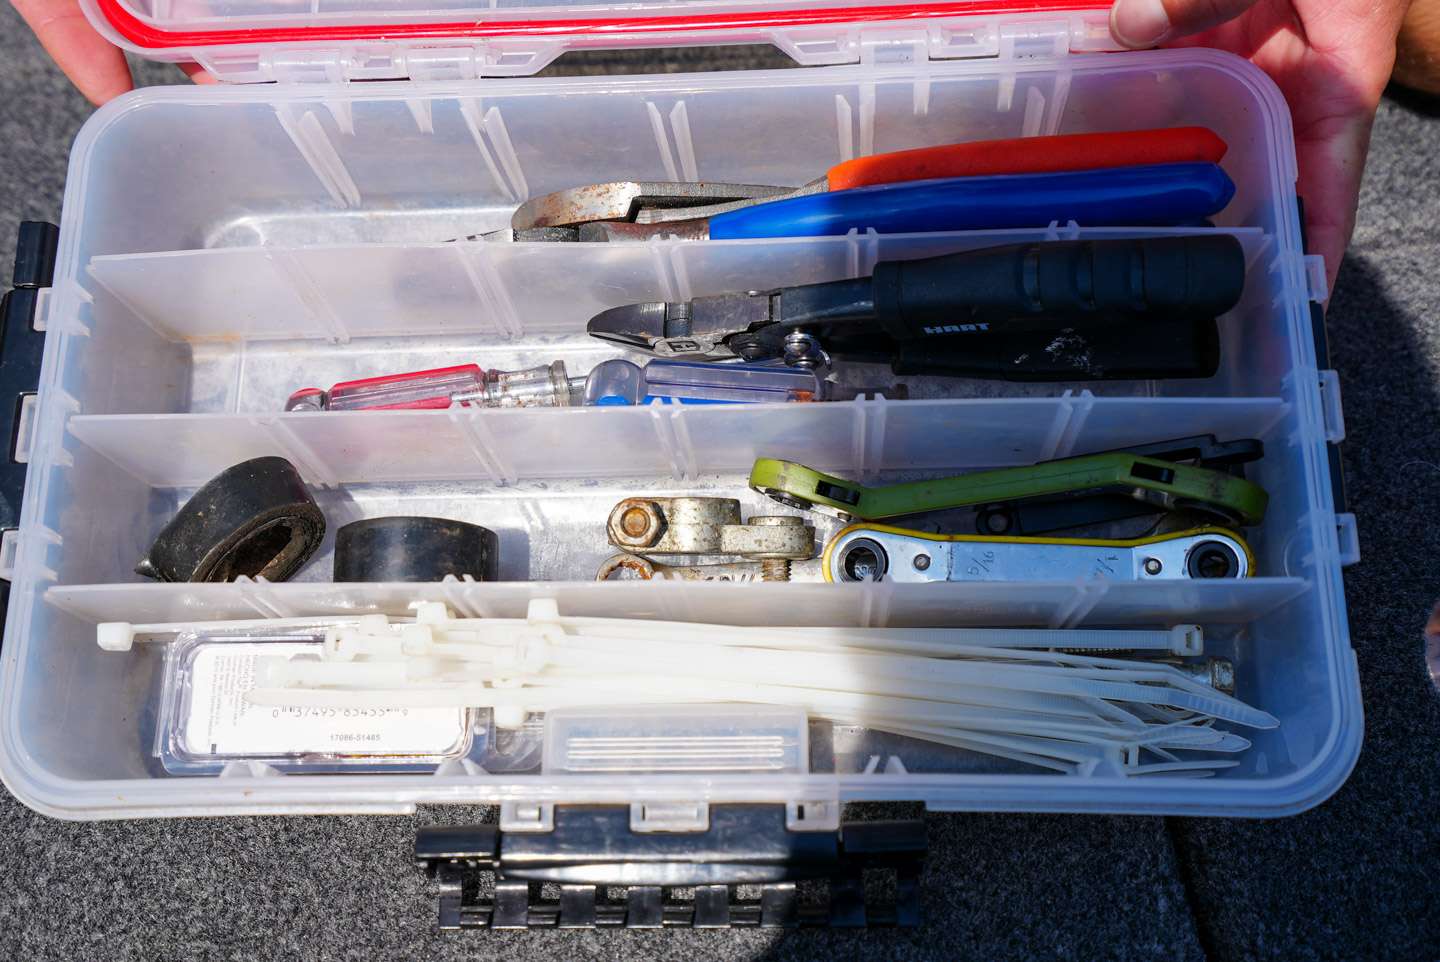 Hamner carries a box full of tools in this compartment as well. Luckily in 2021, Hamner didn't have to pull this box out very often. 